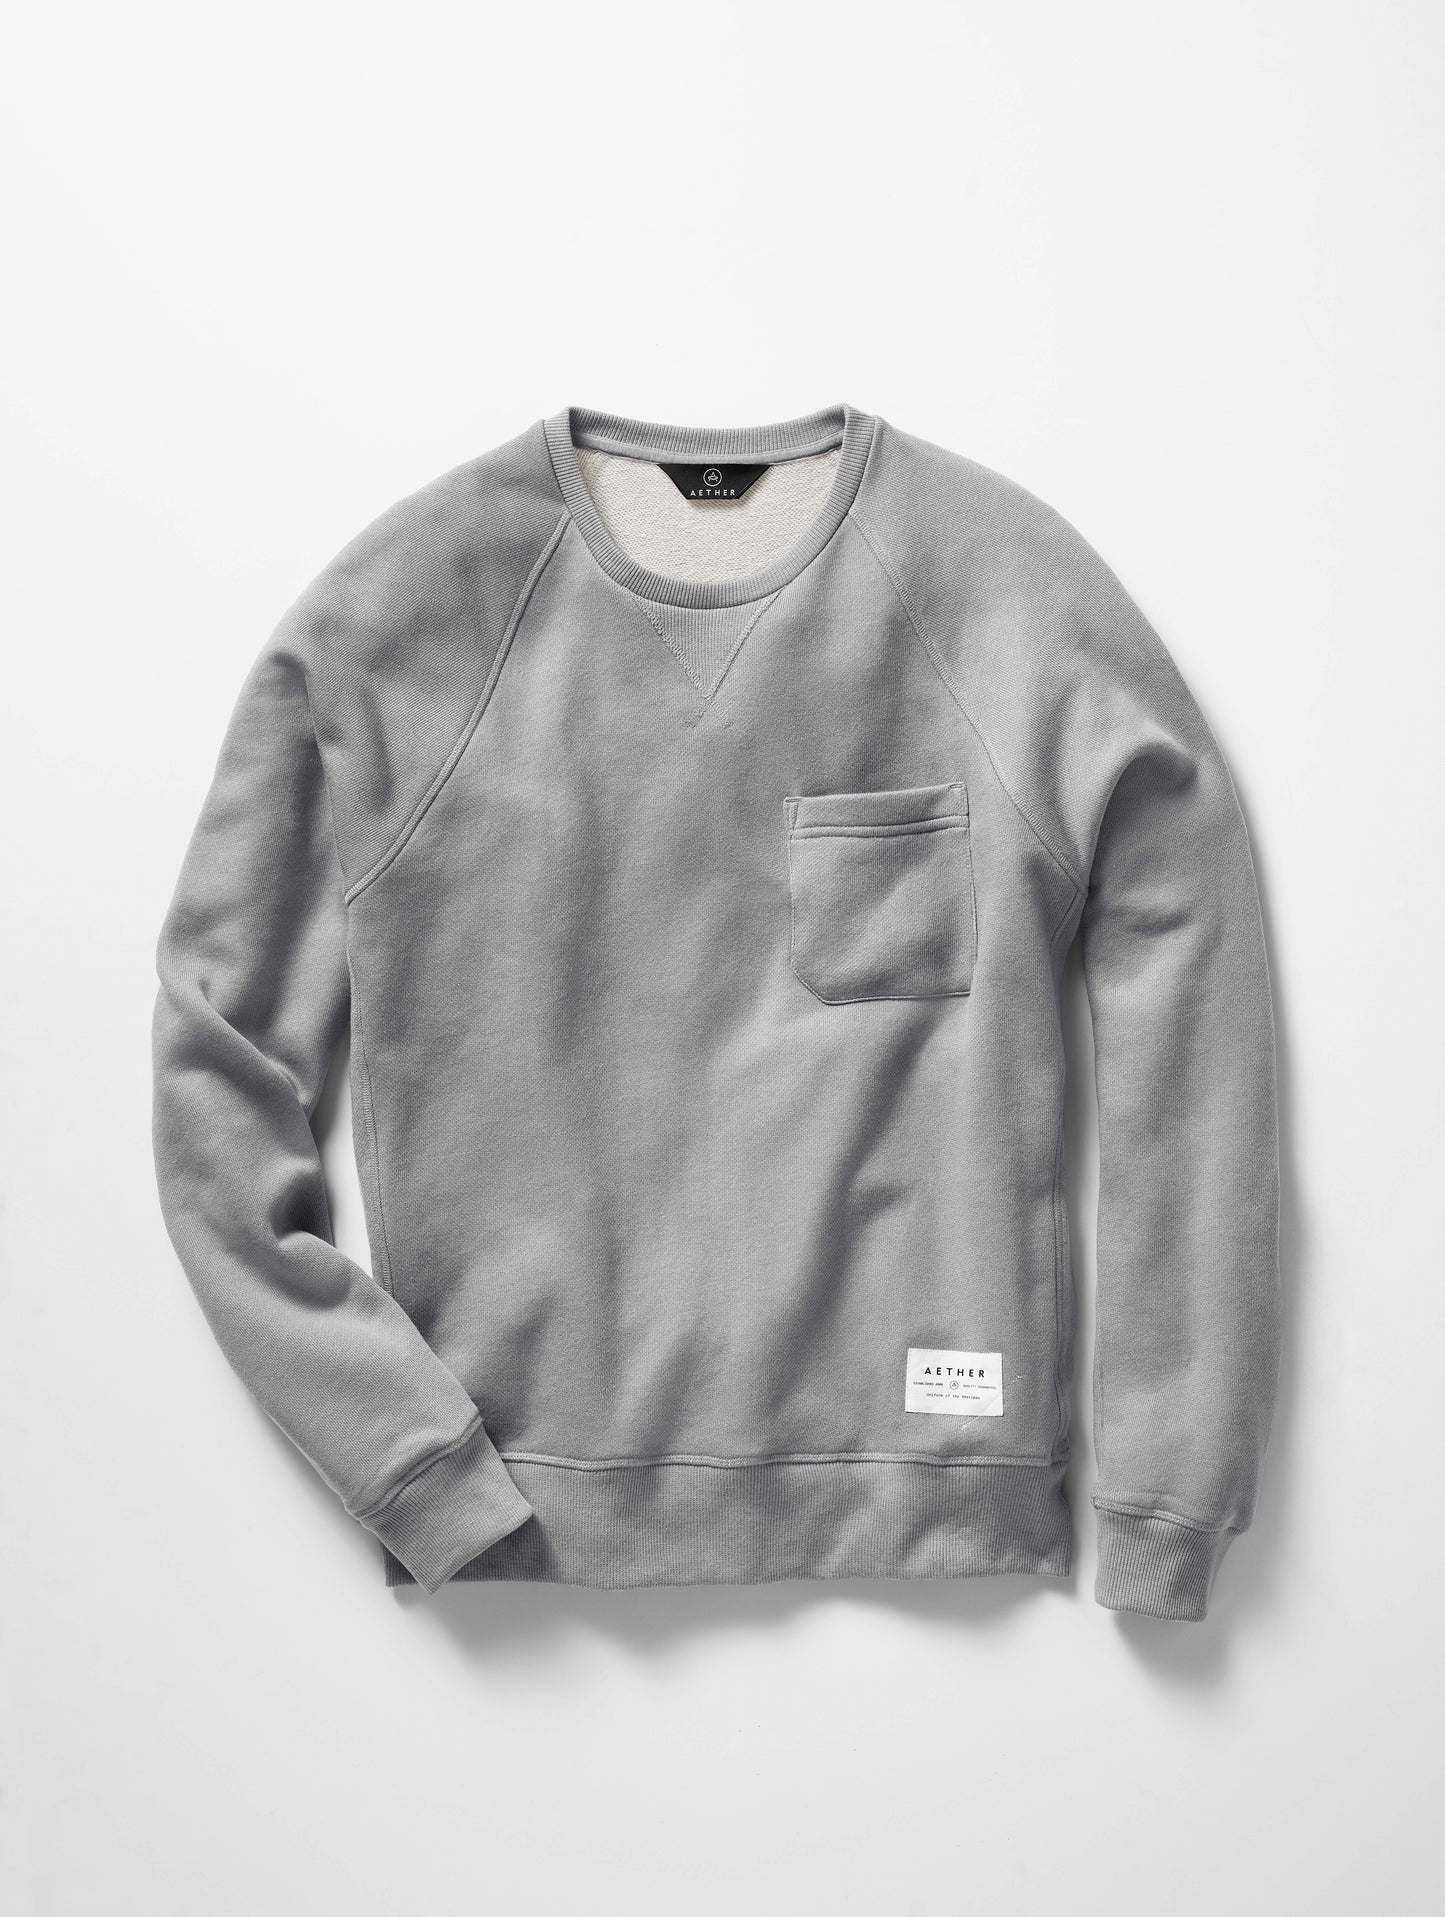 grey crew neck with pocket for men